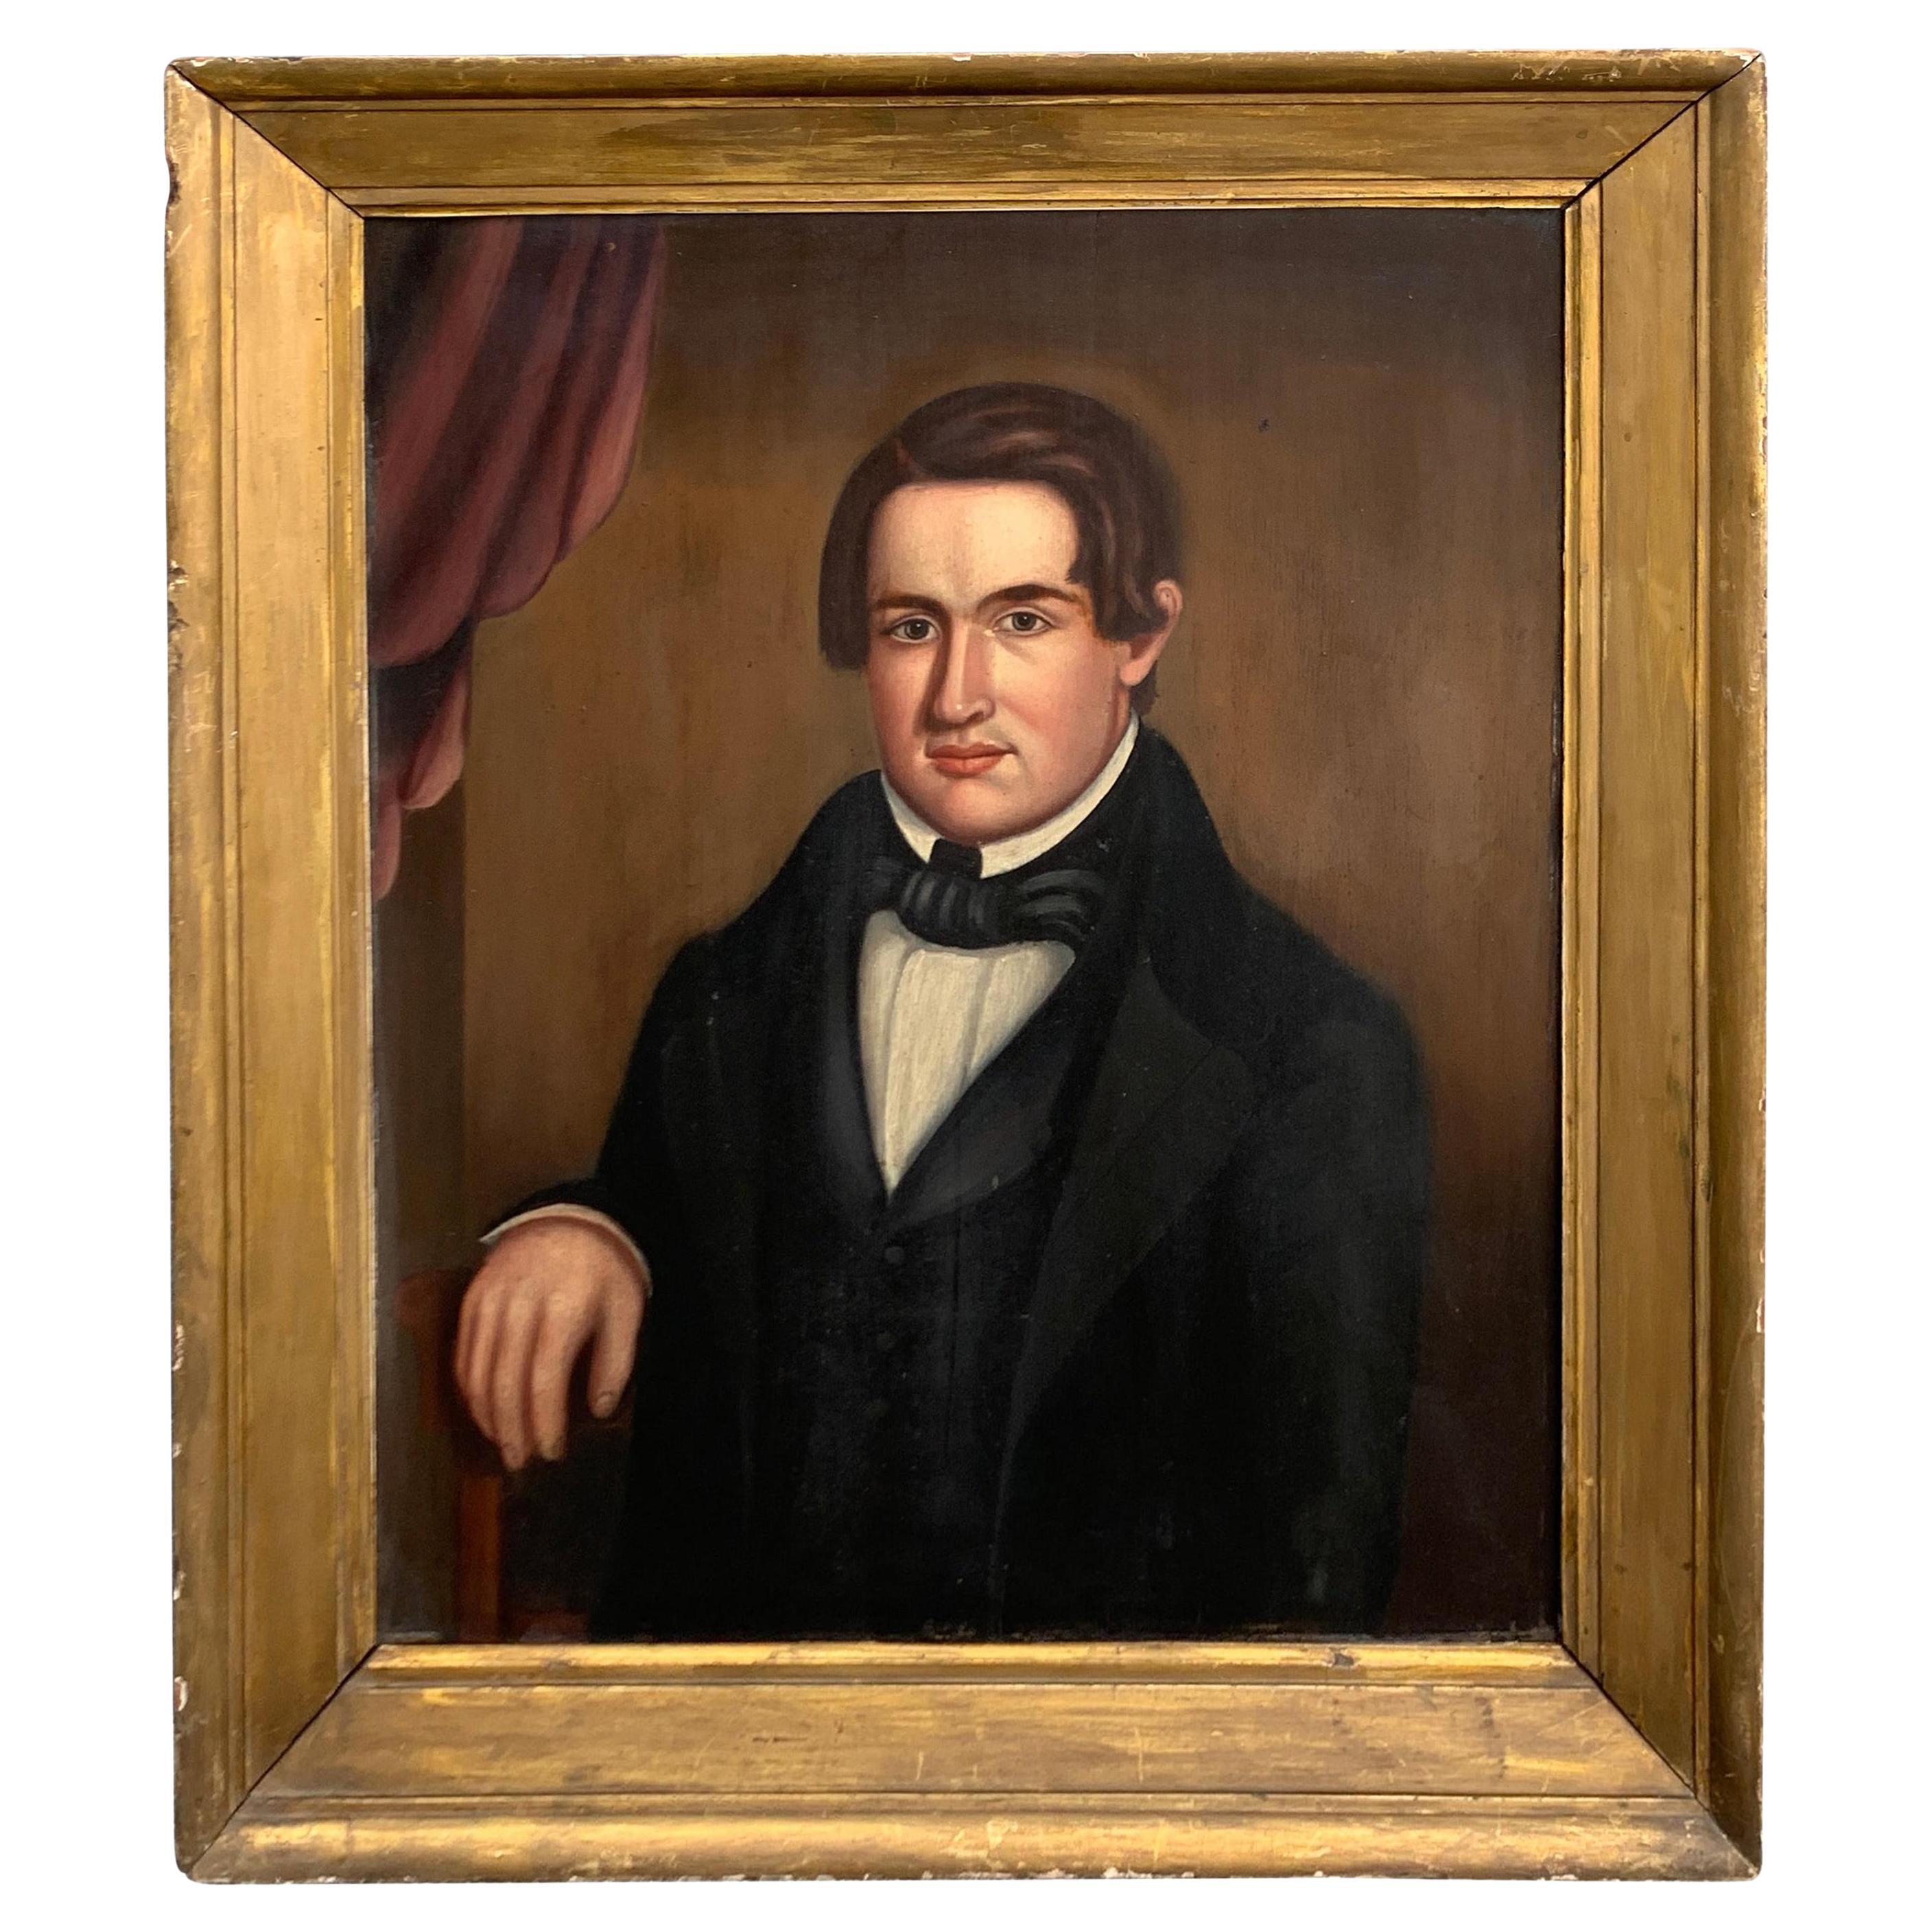 19th Century American Portrait of a Handsome NY Bachelor, Norman Pearl